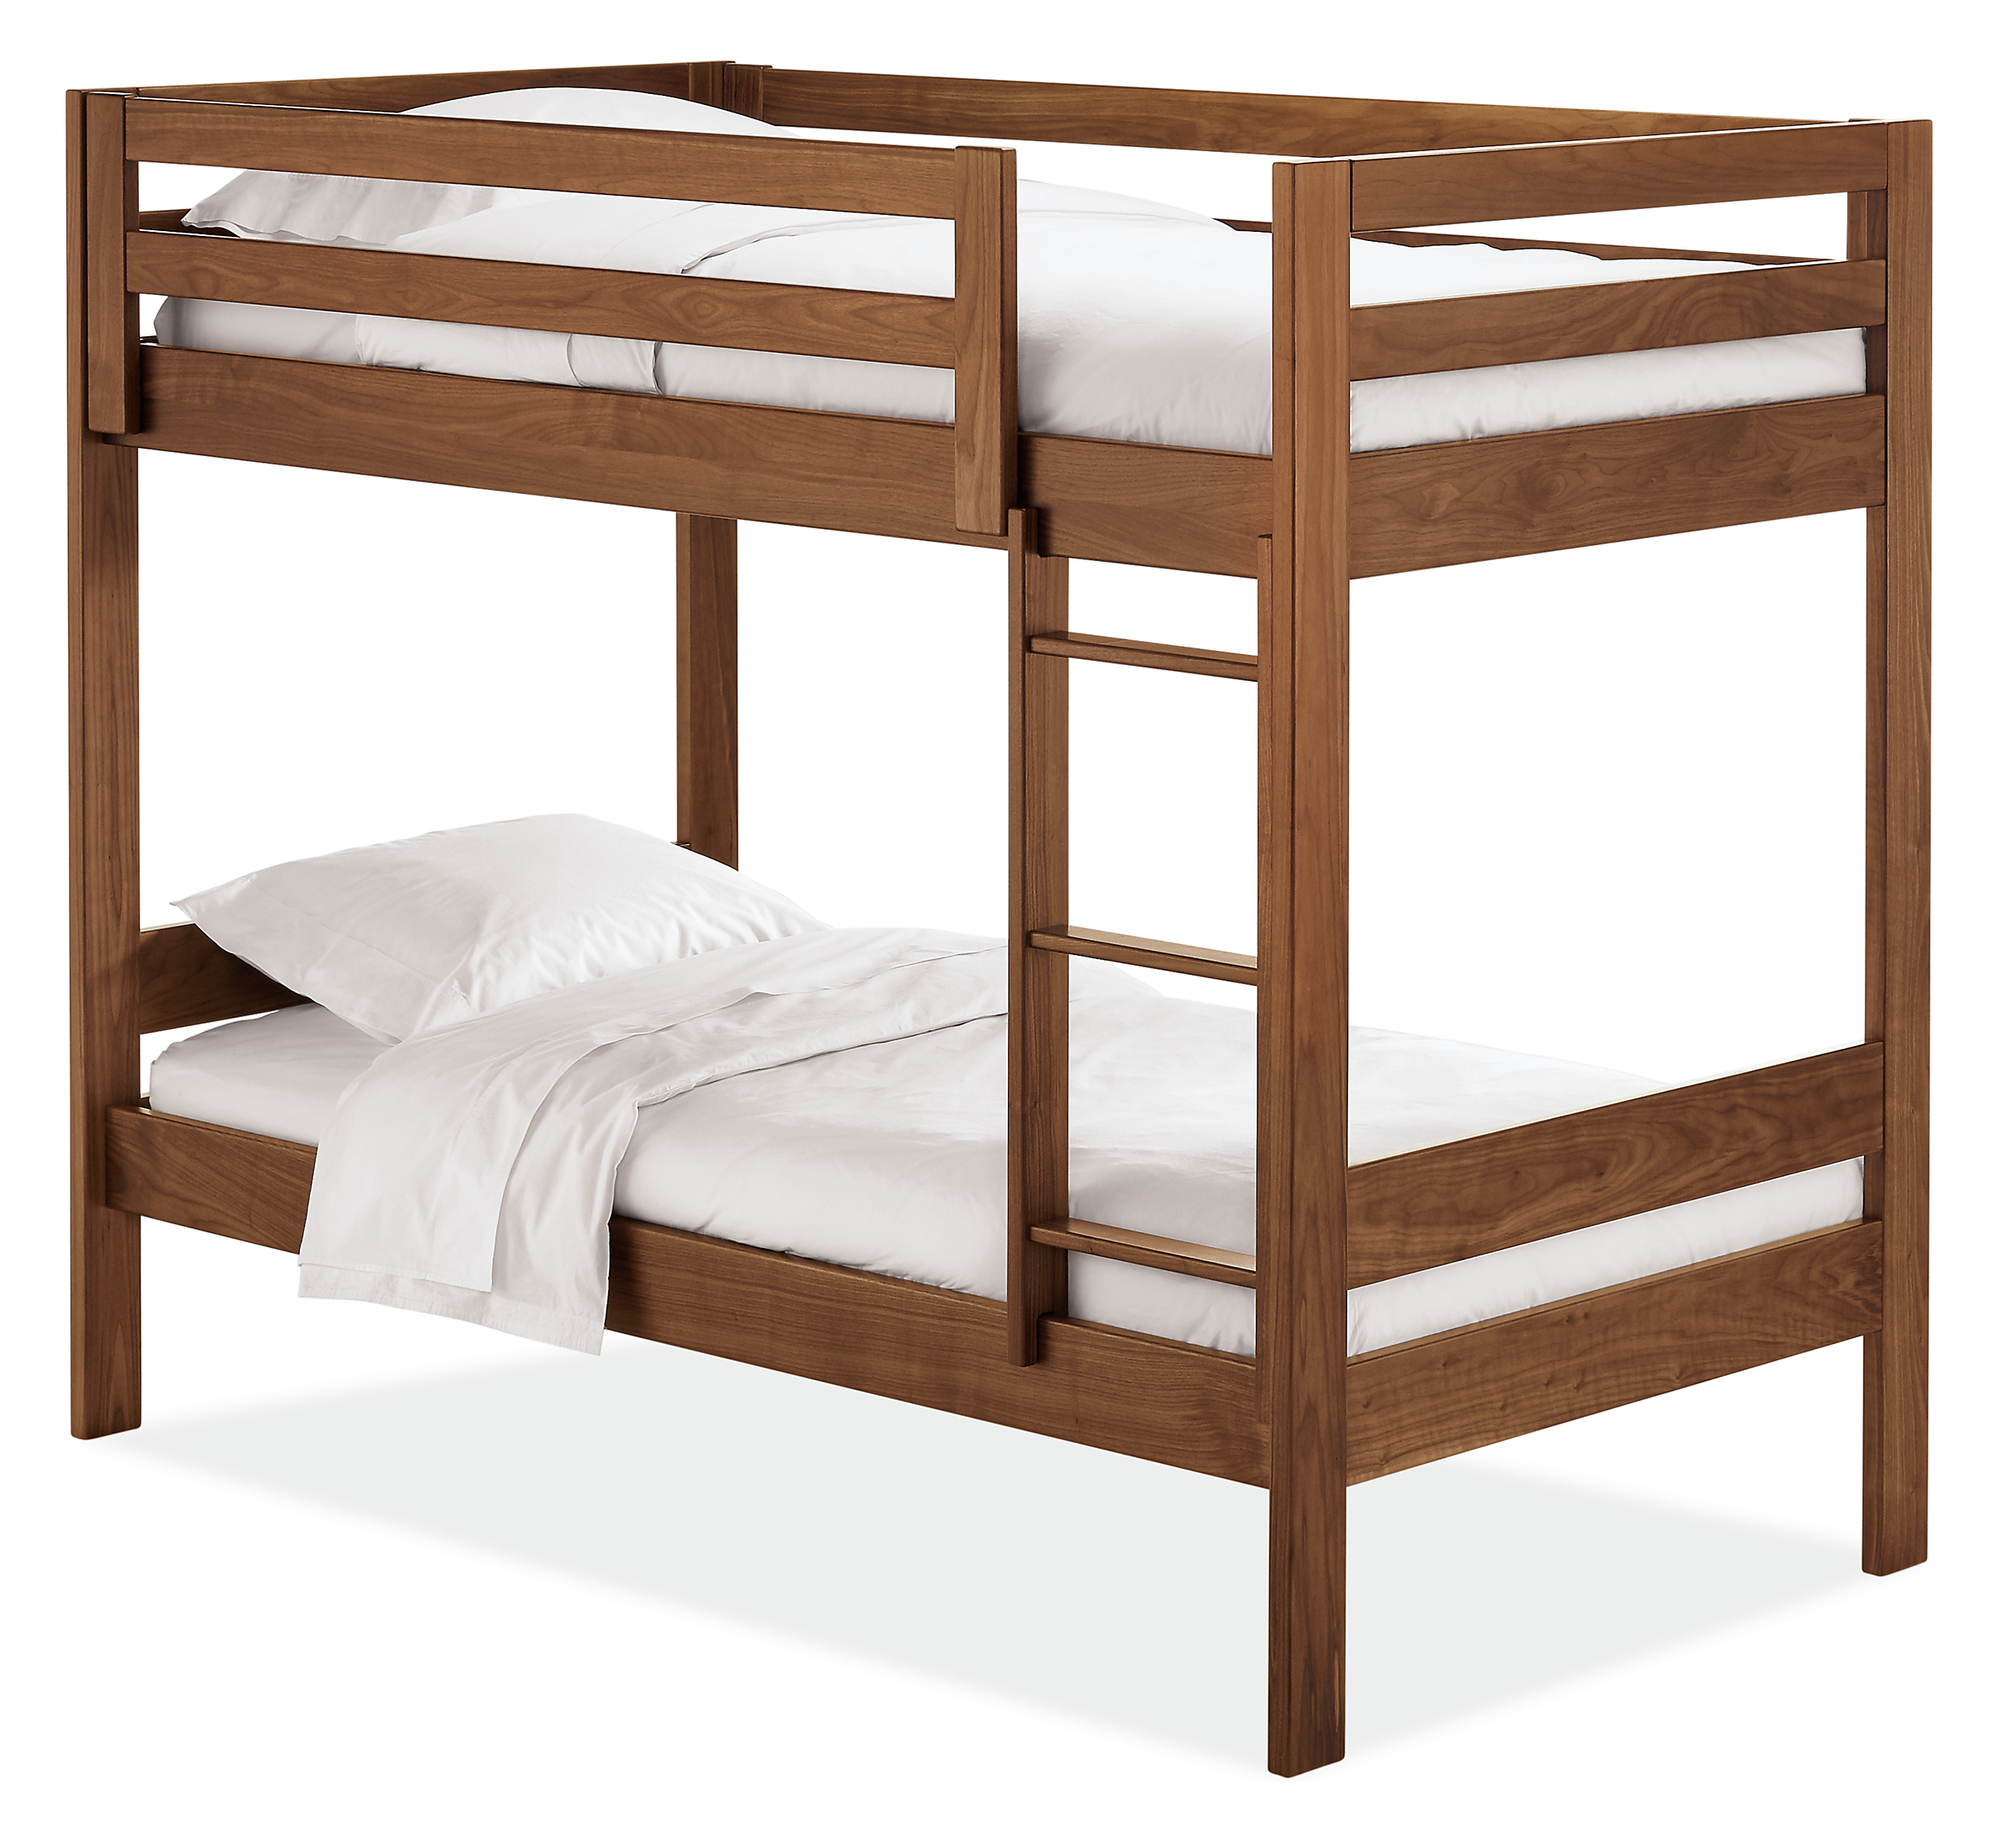 Waverly Twin Over Twin Bunk Bed